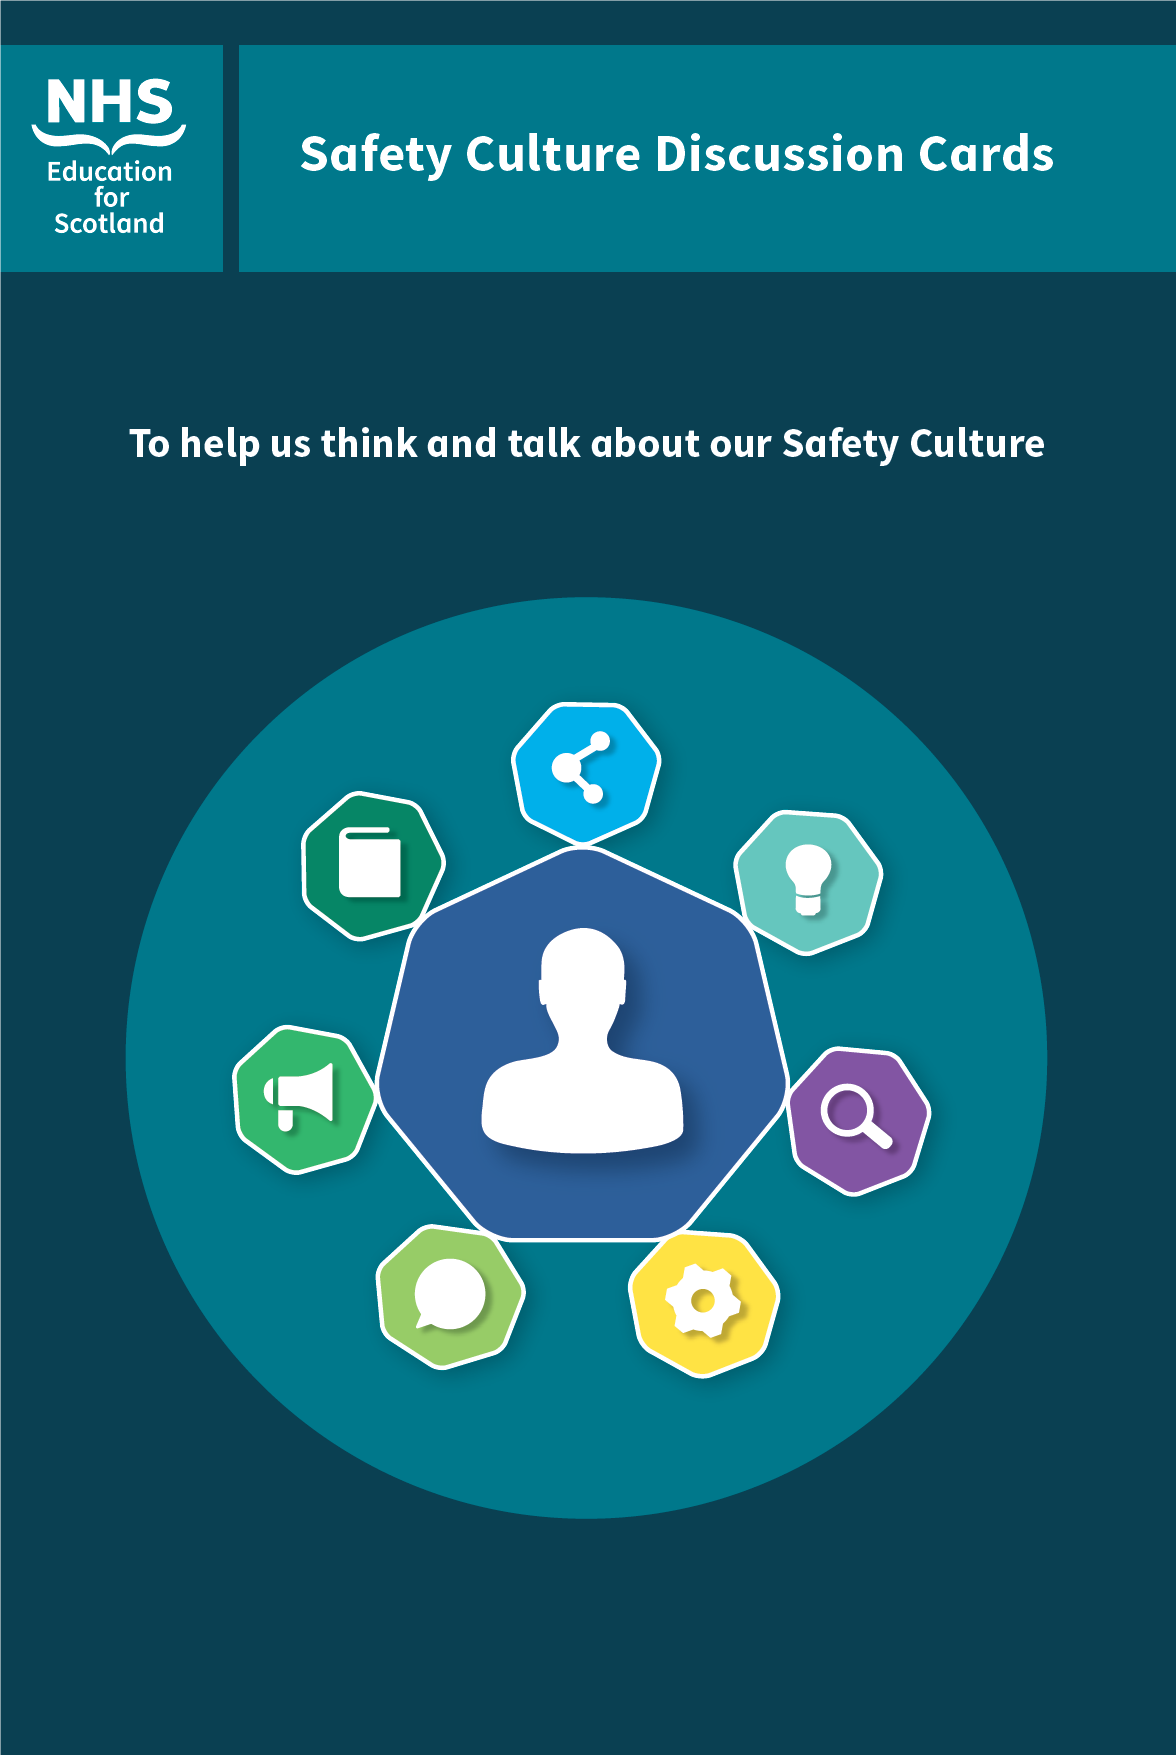 Safety Culture Cards